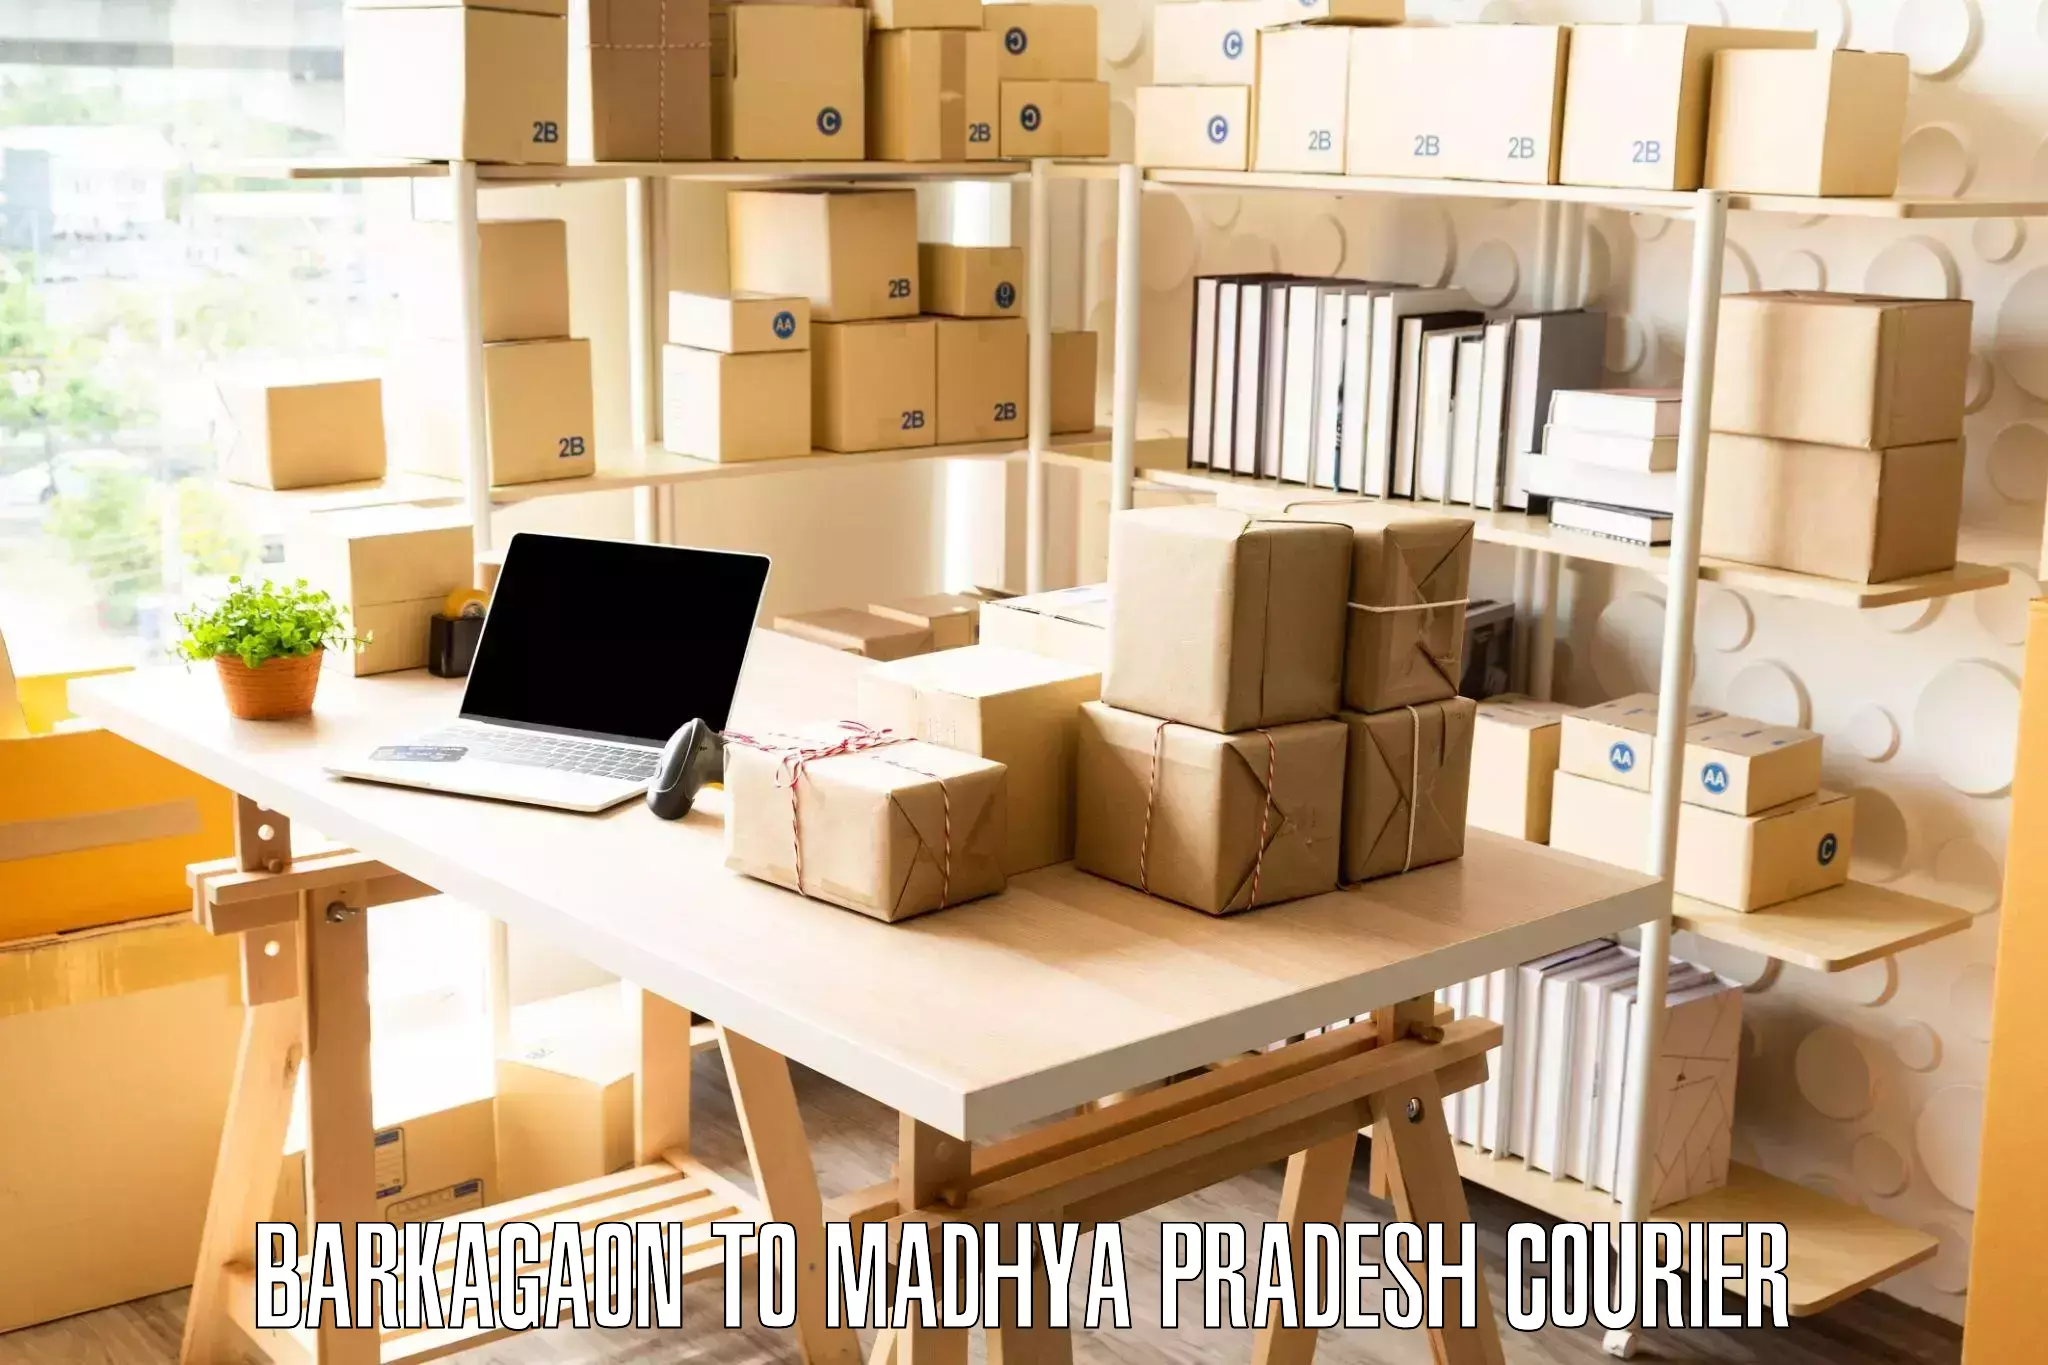 Professional movers and packers Barkagaon to Bhopal